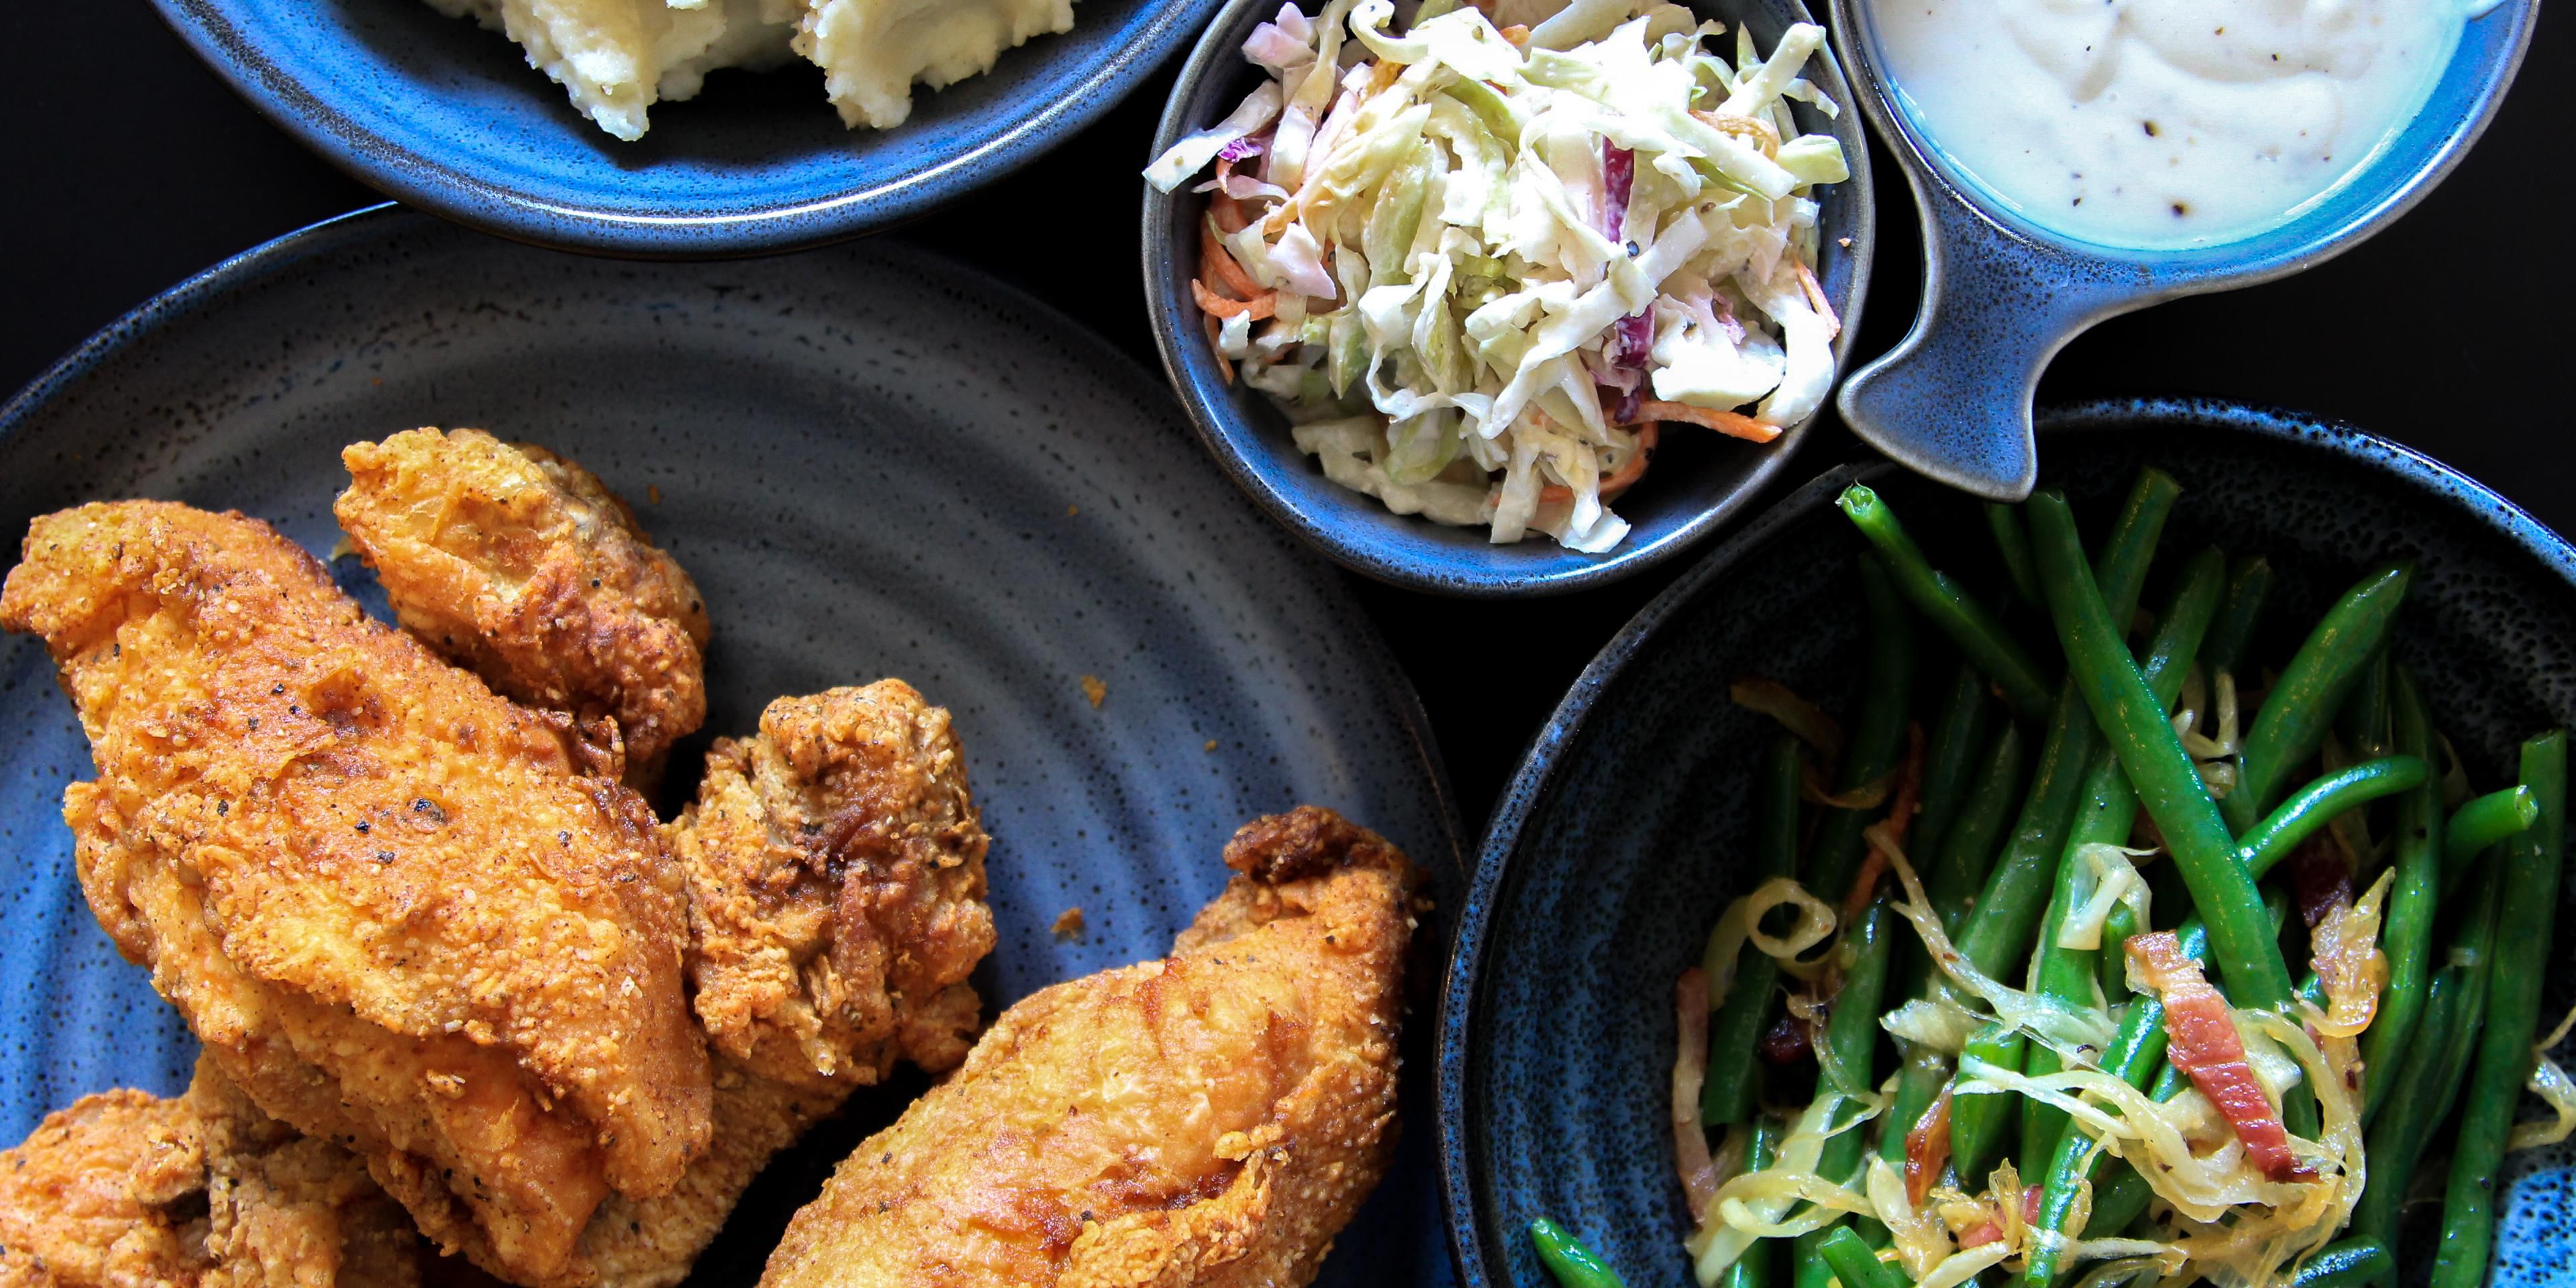 Feast on Fried Chicken and all the fixings!  Every Thursday! 